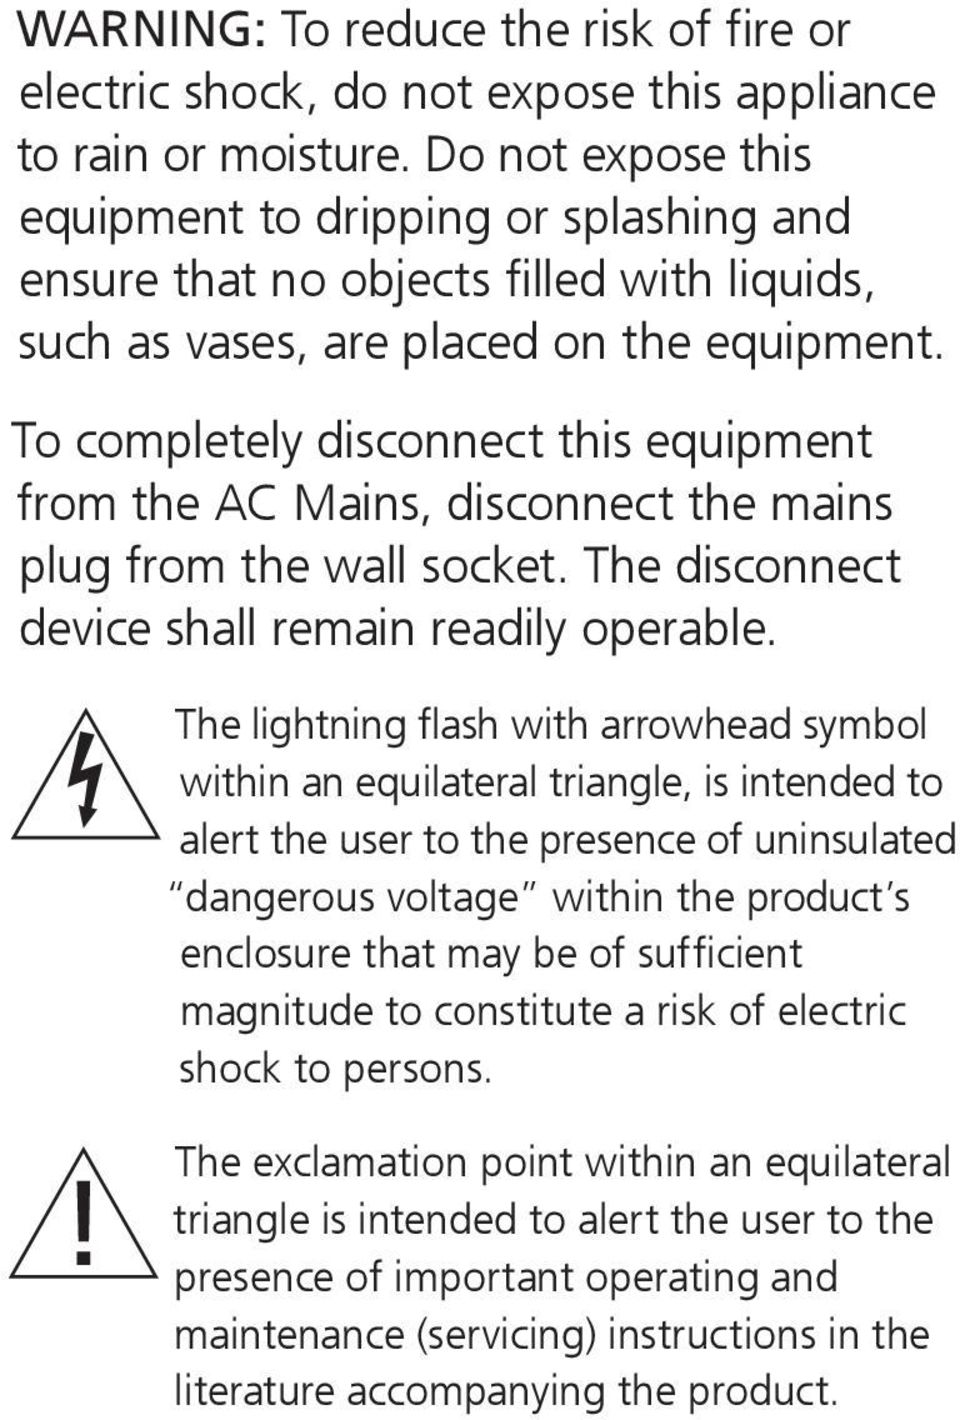 To completely disconnect this equipment from the AC Mains, disconnect the mains plug from the wall socket. The disconnect device shall remain readily operable.